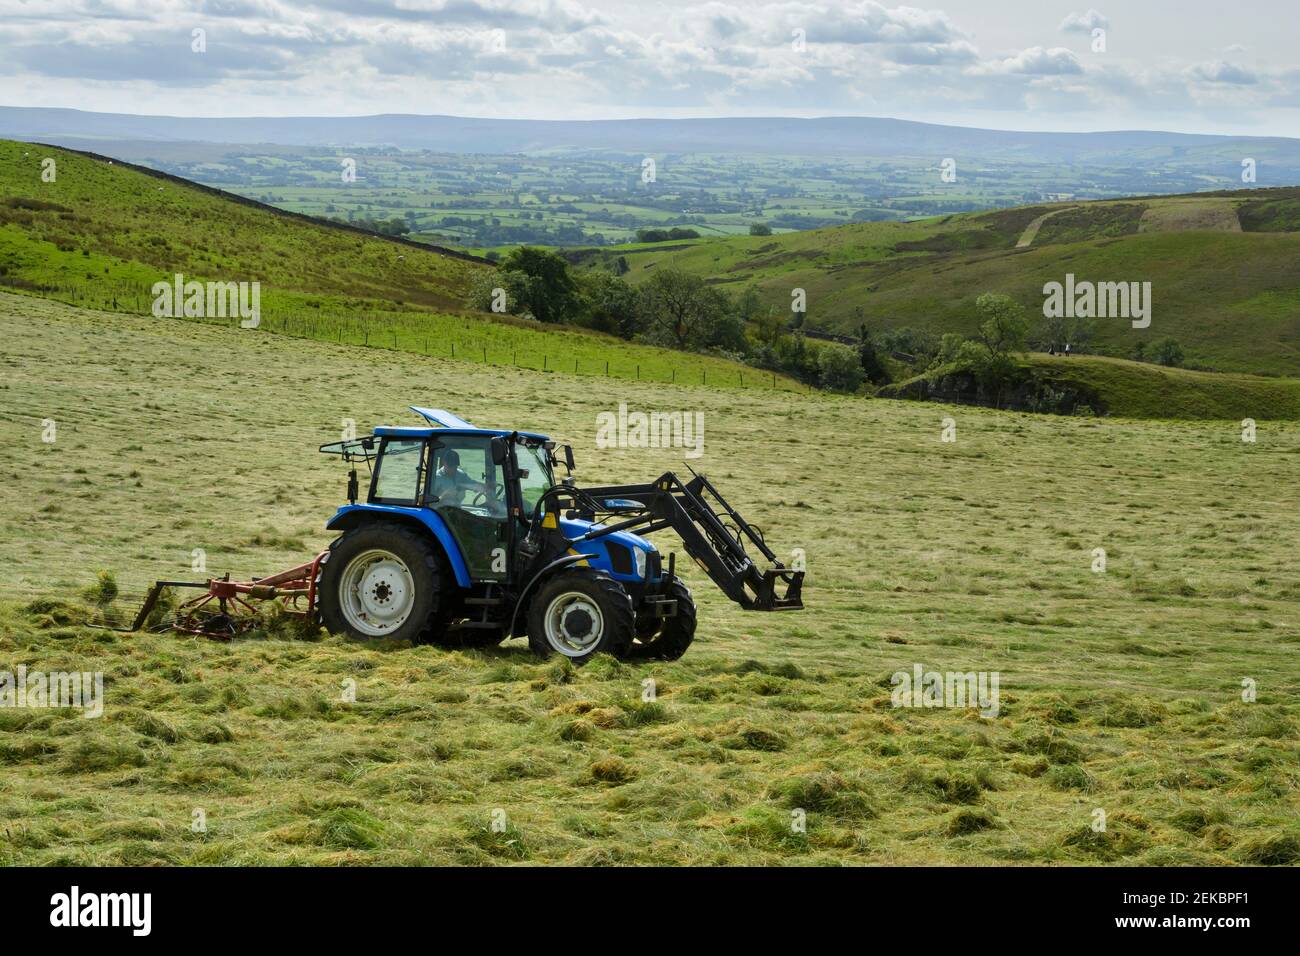 Tractor haymaking (pulling & towing tedder, tedding farm silage crop) in scenic farmland pasture field near Grassington, Yorkshire Dales, England, UK. Stock Photo